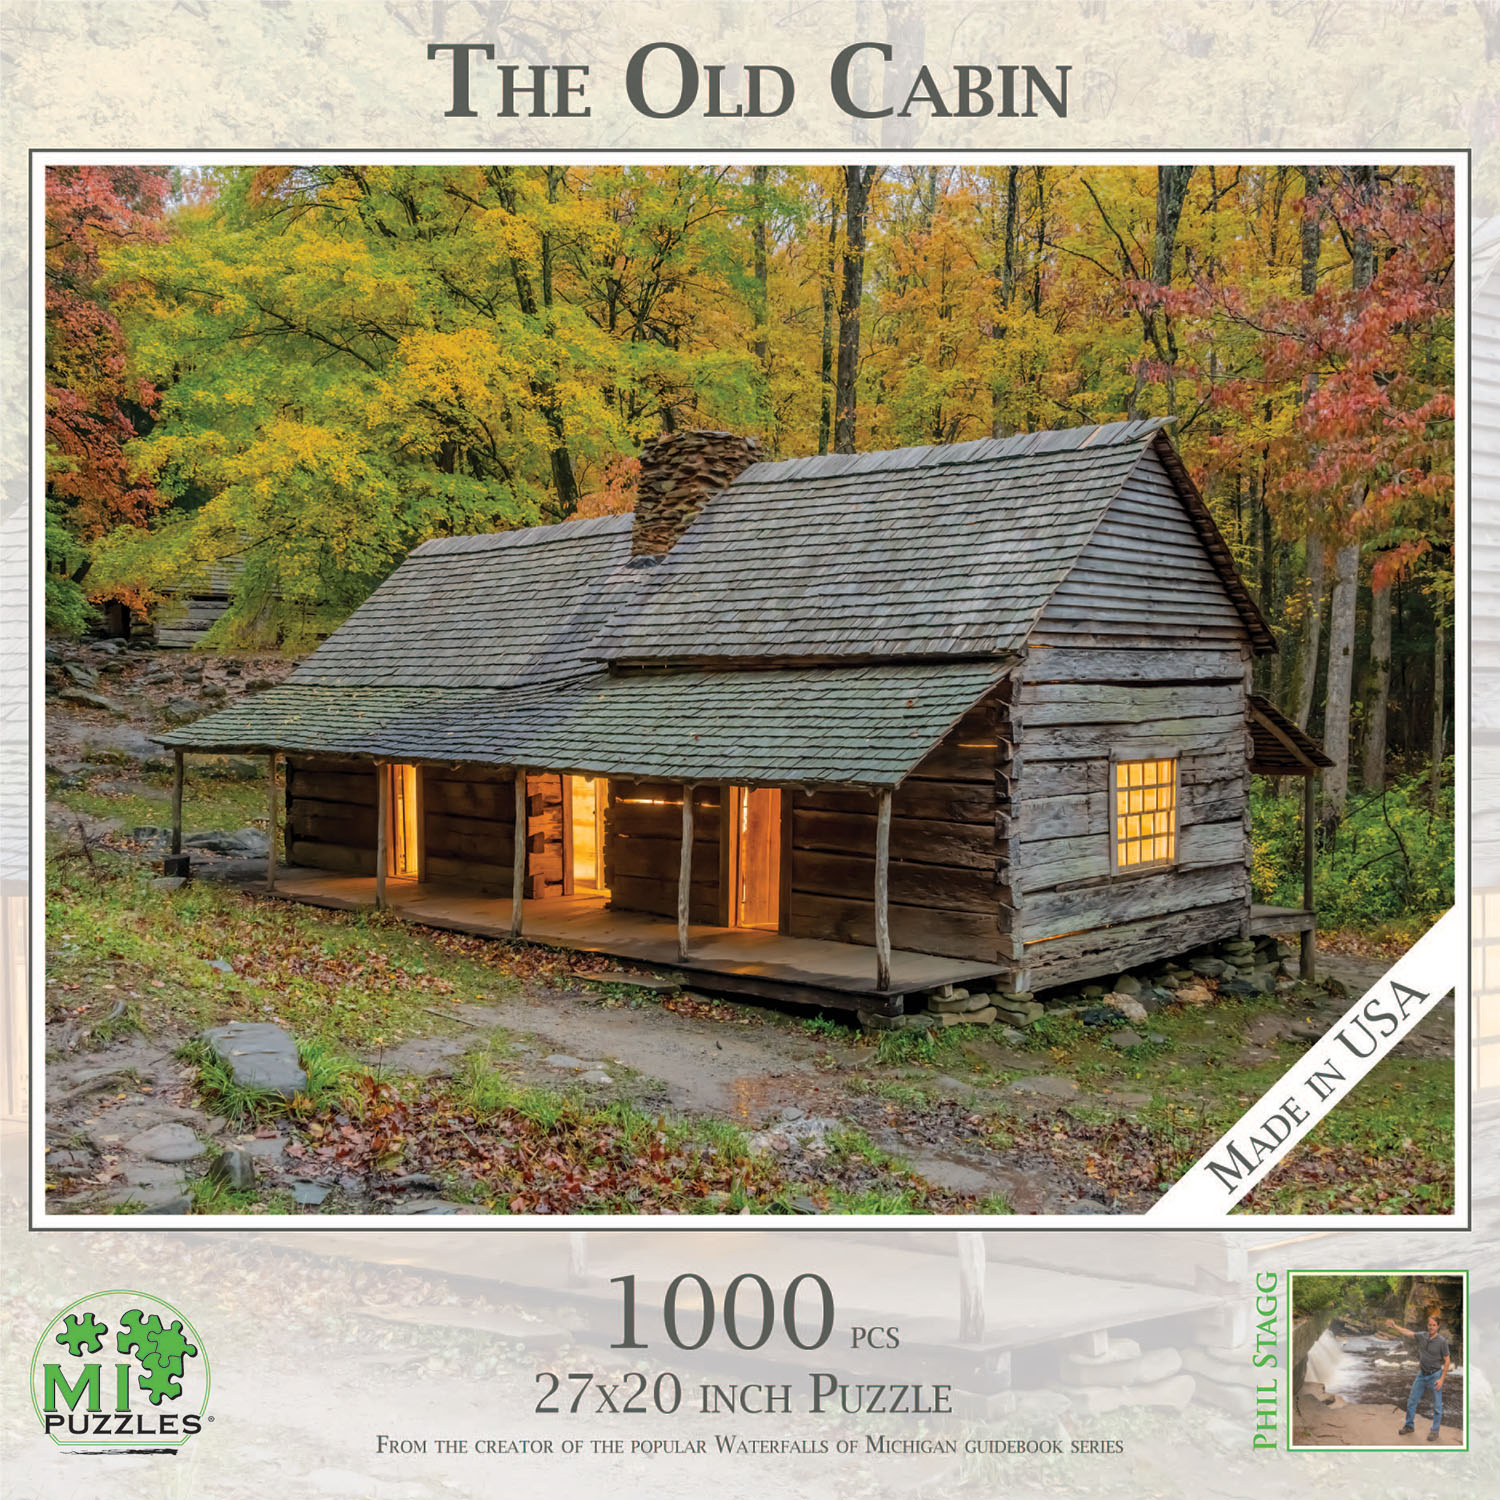 The Old Cabin